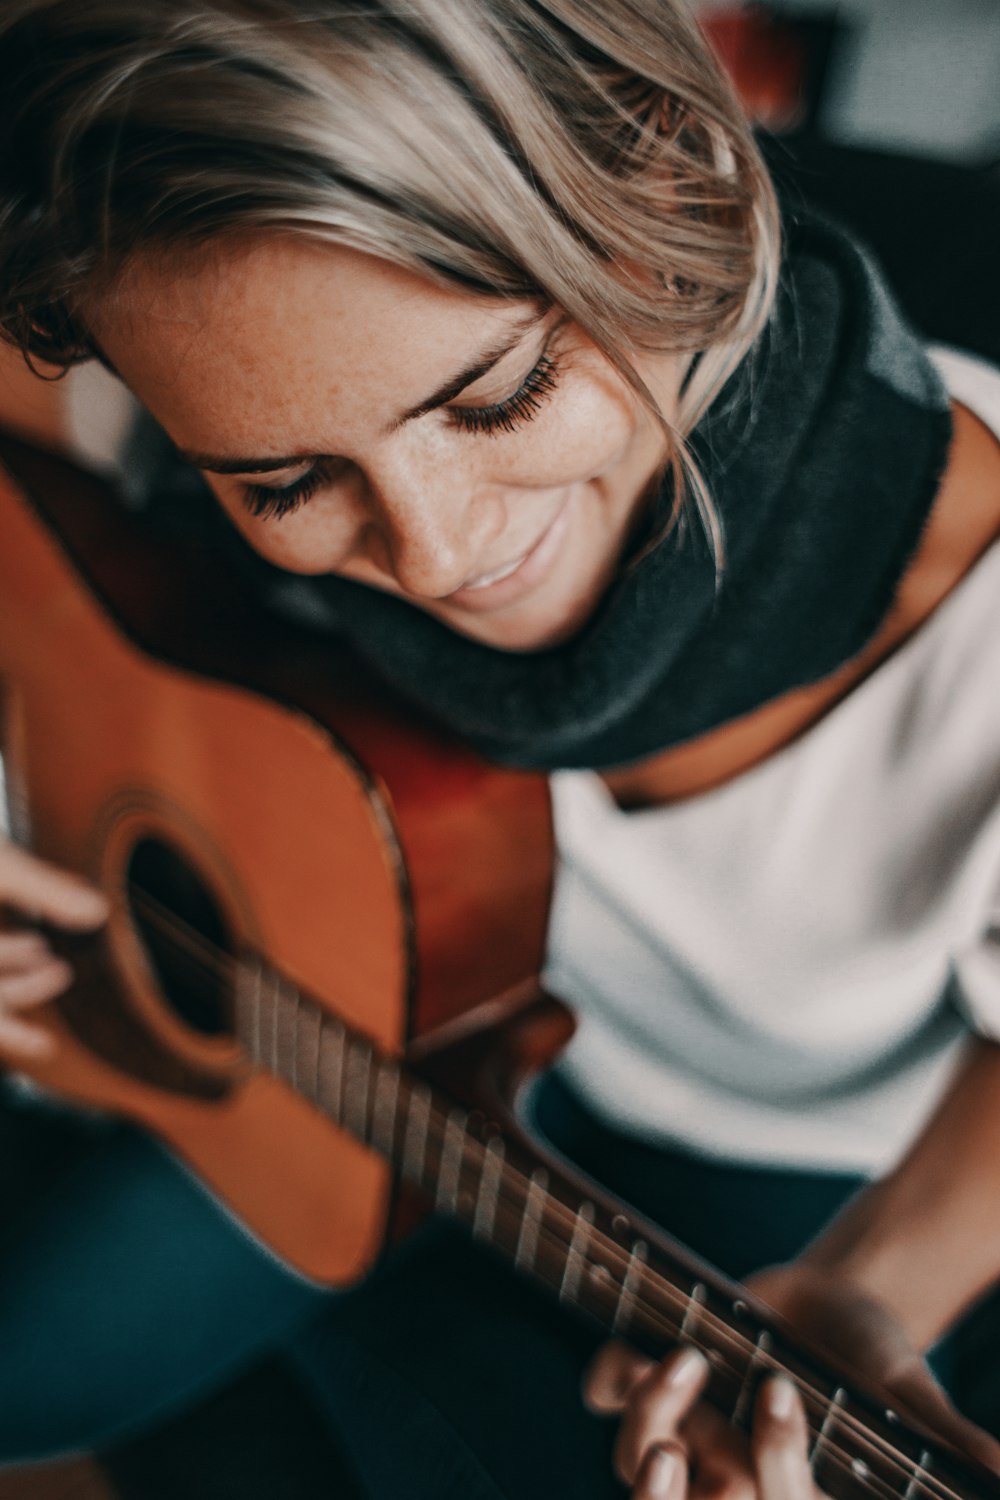 woman in white top playing acoustic guitar